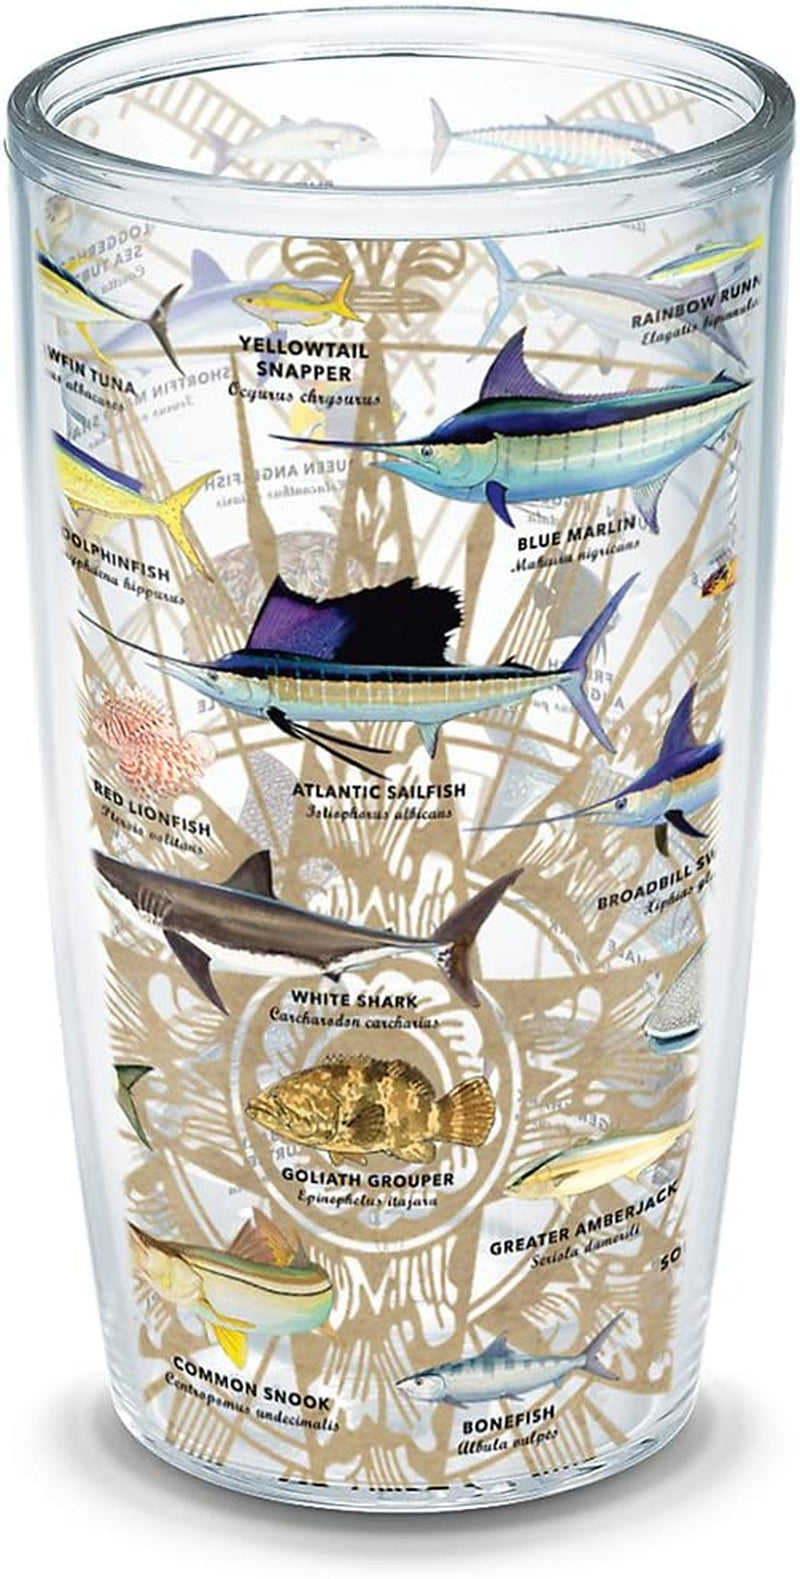 Tervis Made in USA Double Walled Guy Harvey Insulated Tumbler Cup Keeps Drinks Cold & Hot, 16Oz Mug - No Lid, Charts Home & Garden > Kitchen & Dining > Tableware > Drinkware Tervis Classic 16 oz-No Lid 